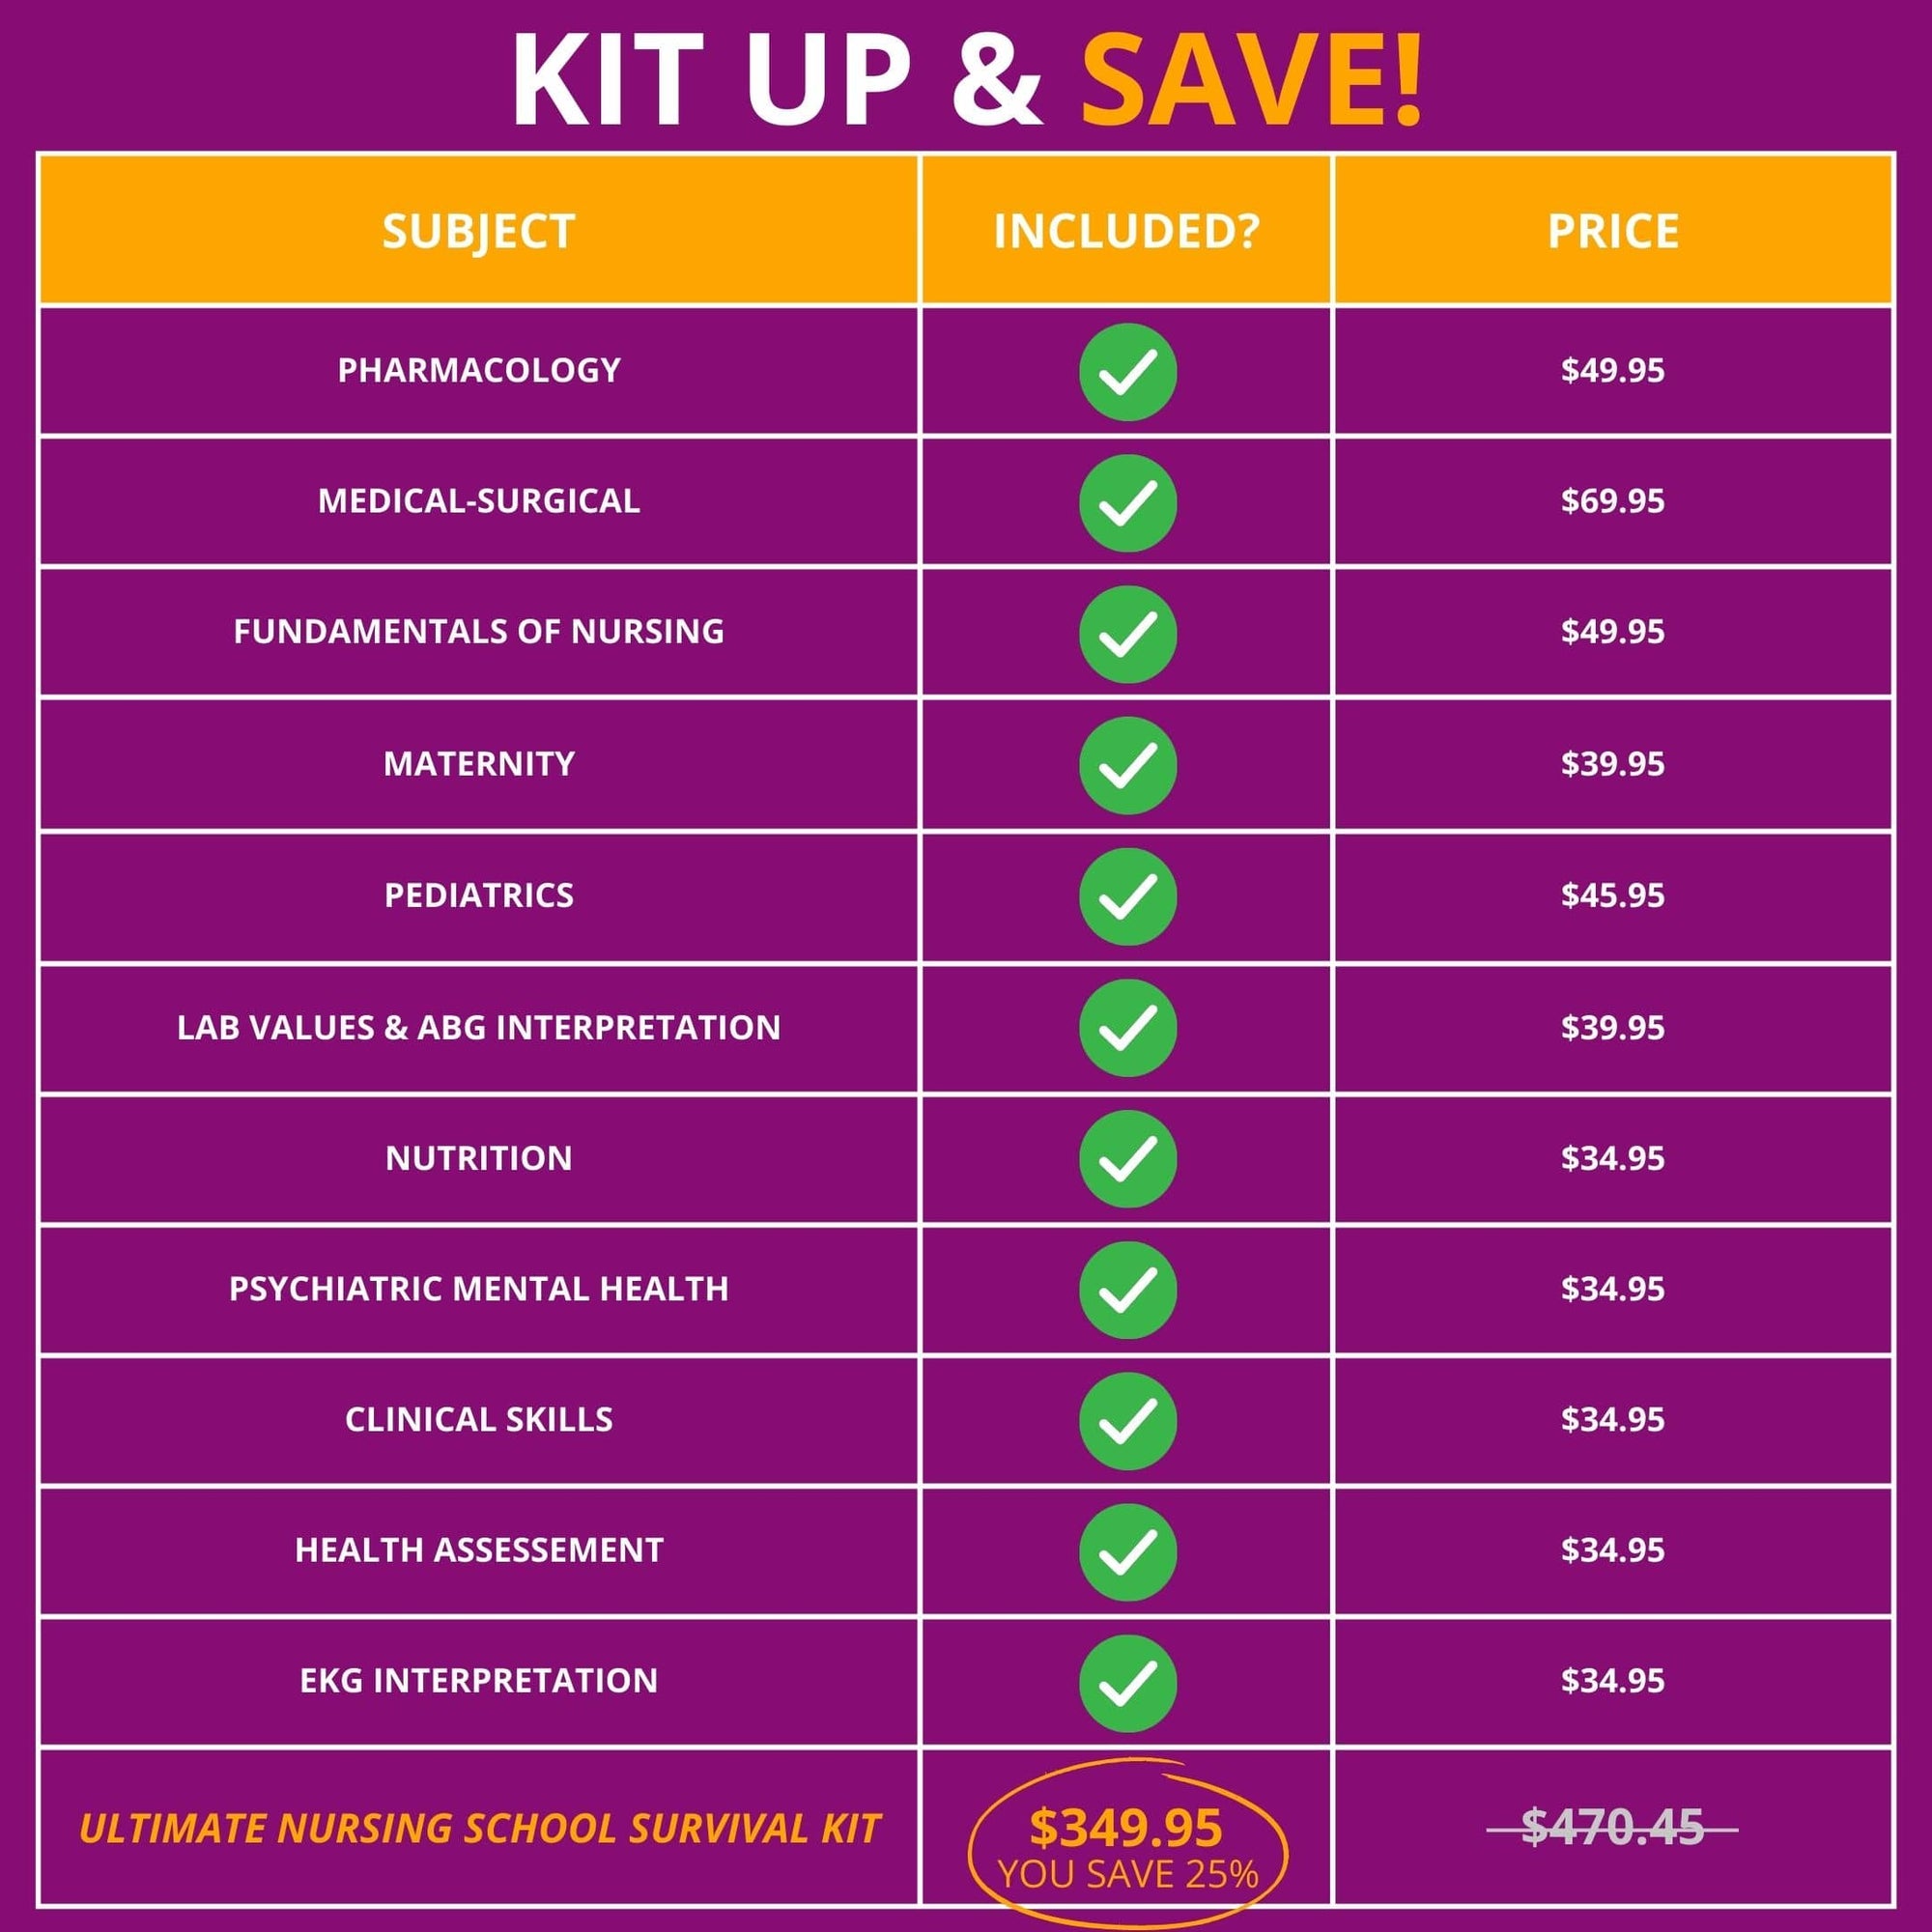 Save with the kit